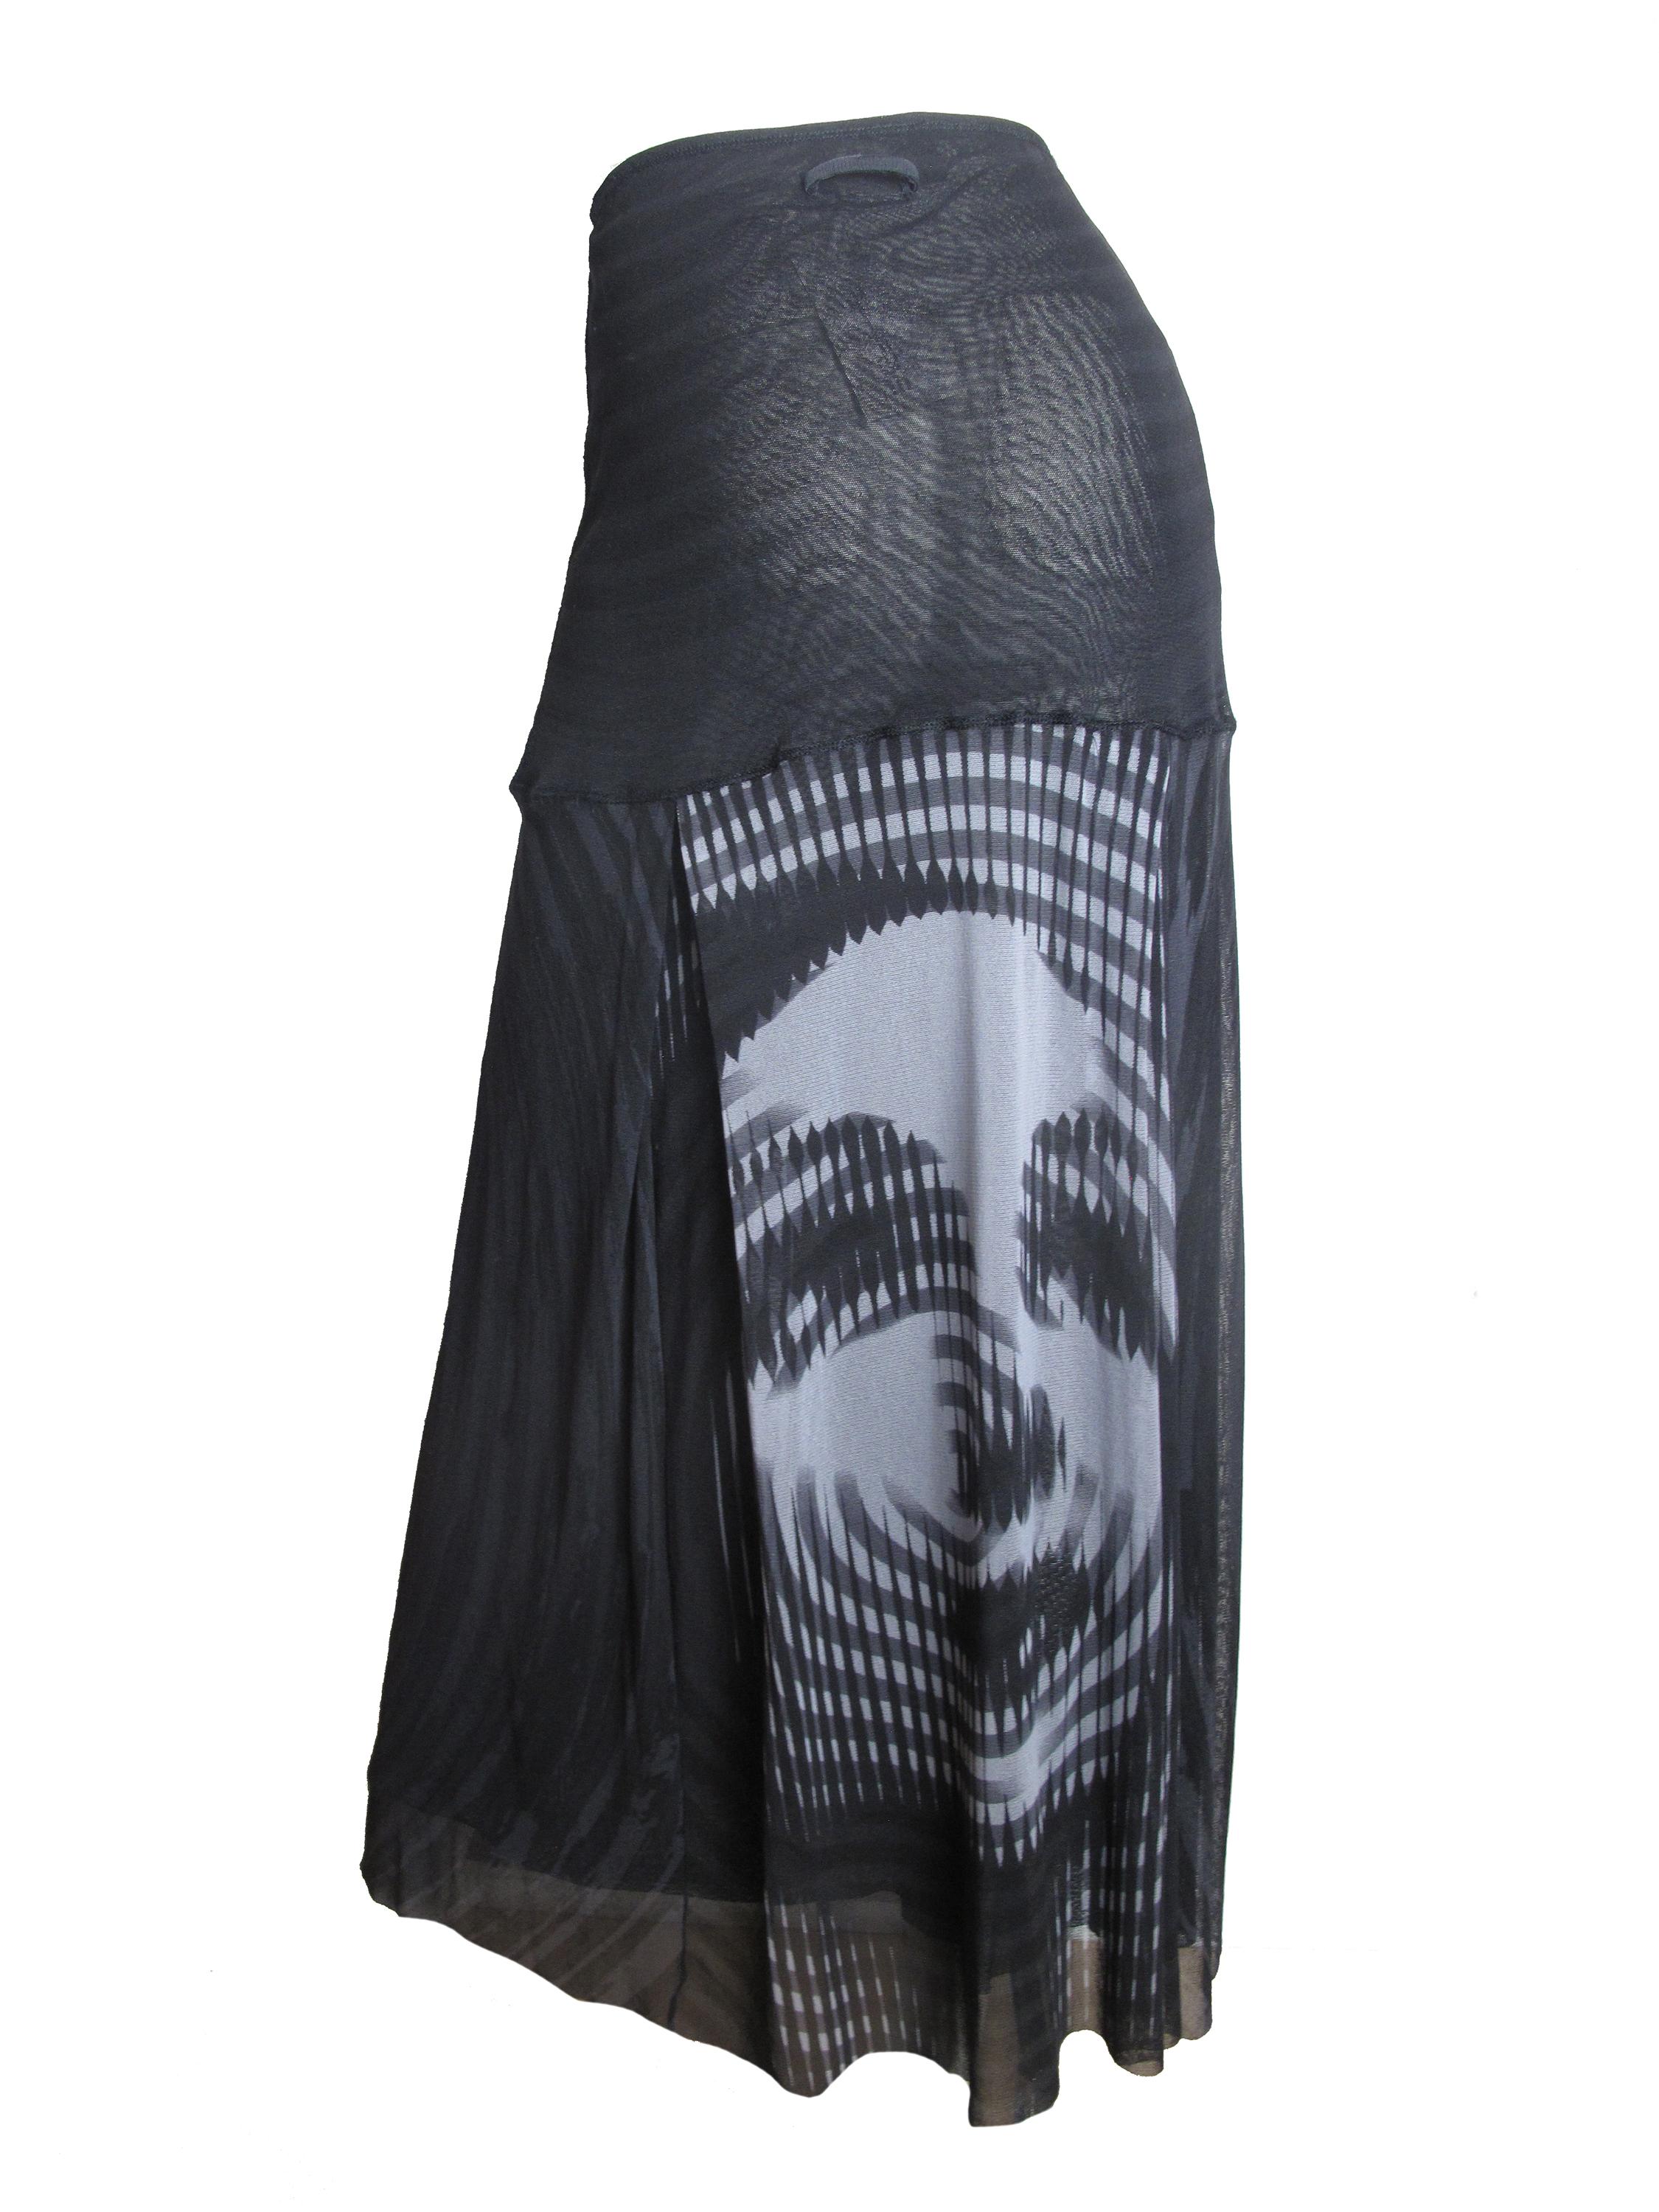 Jean Paul Gaultier black stretchy sheer mesh skirt with Marlene Dietrich print. Condition: Excellent. Size M 
